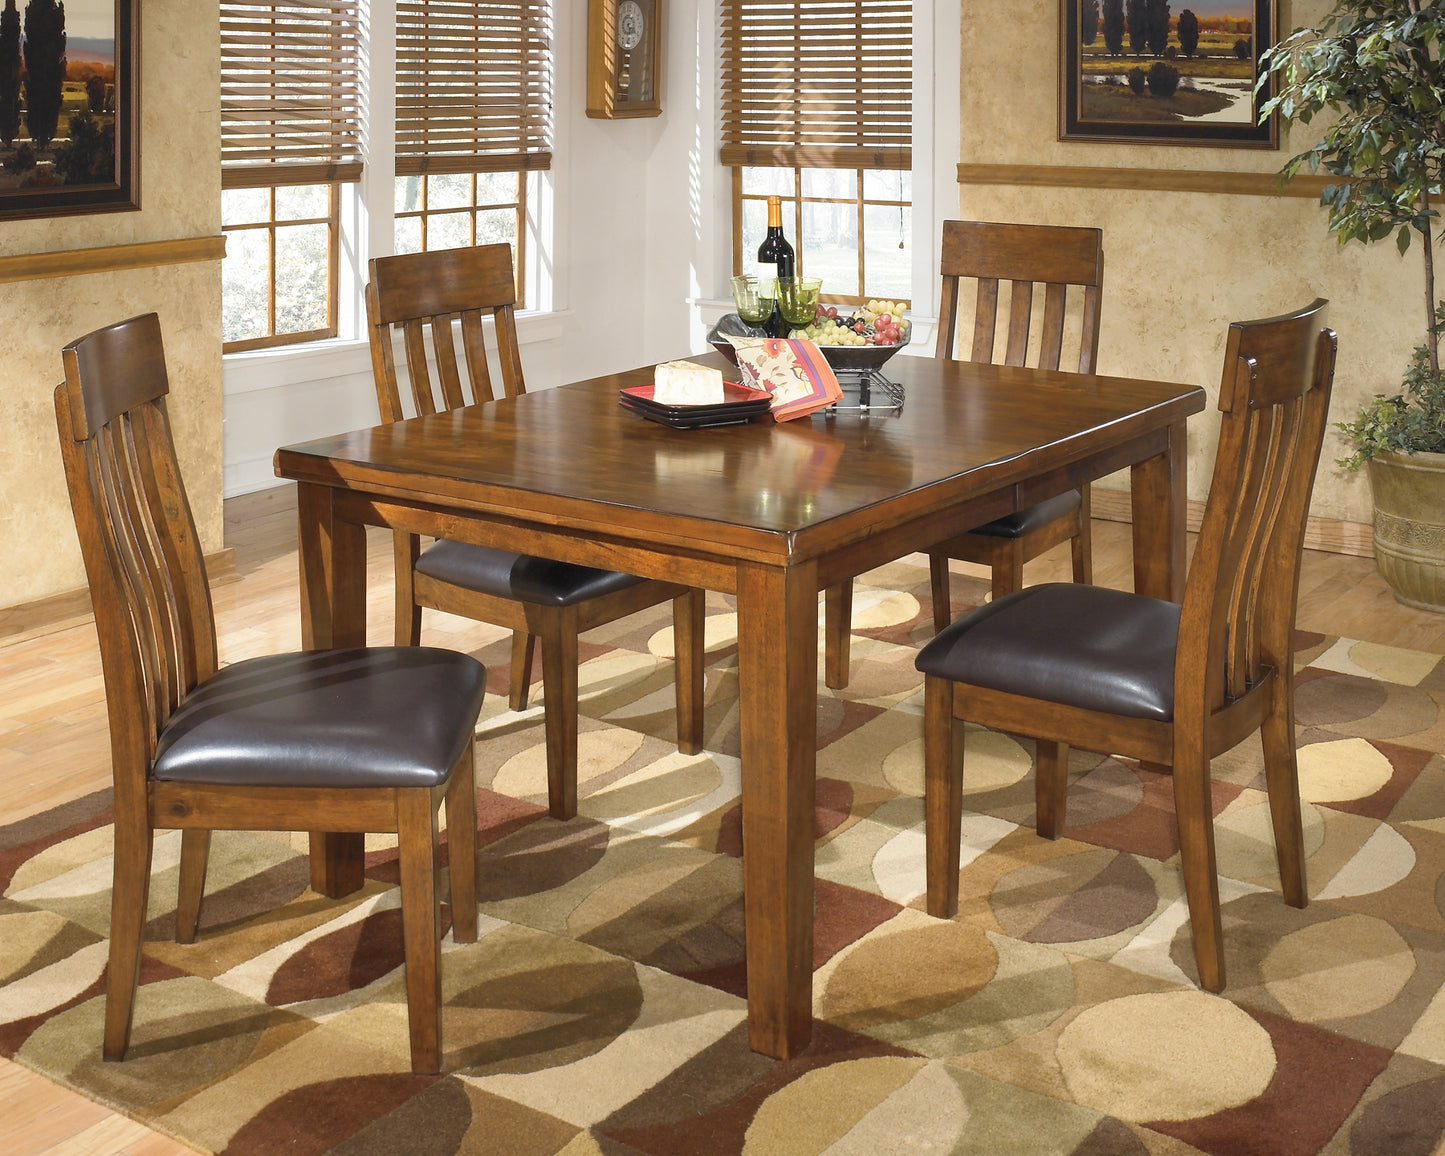 Ralene Dining Table and 4 Chairs